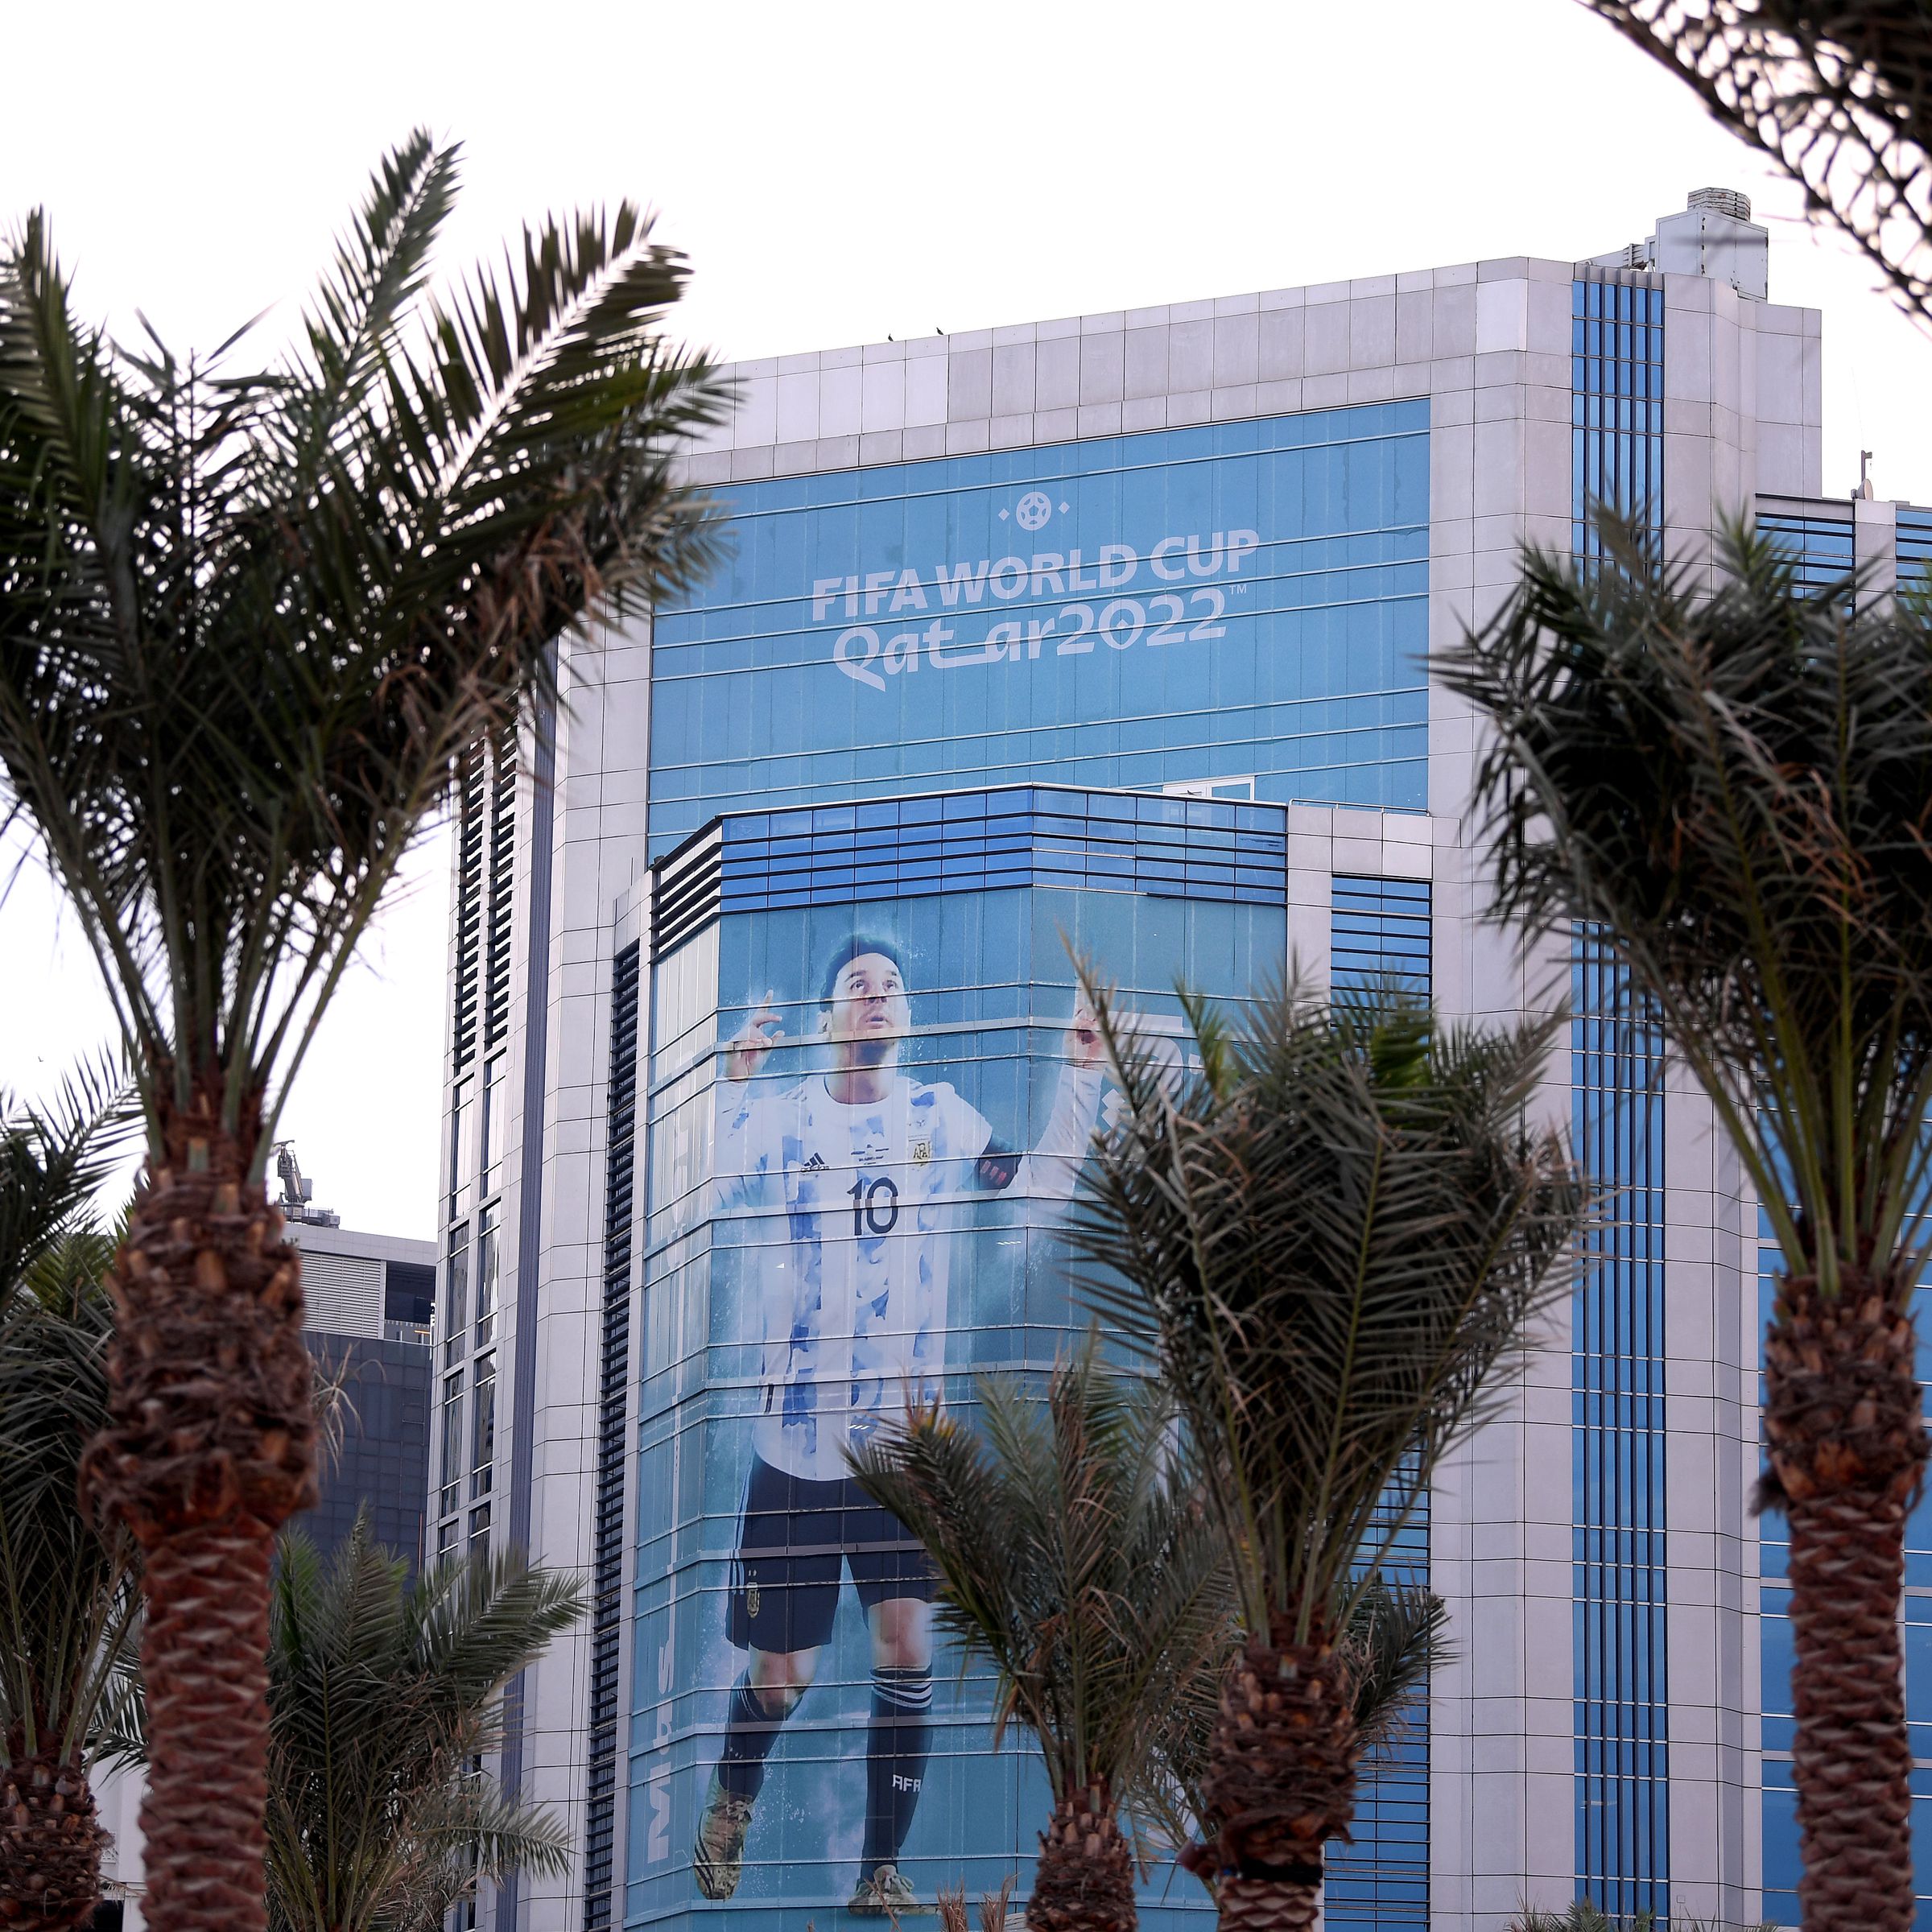 A giant image of Lionel Messi of Argentina is seen on a building ahead of the FIFA World Cup 2022 in Qatar.